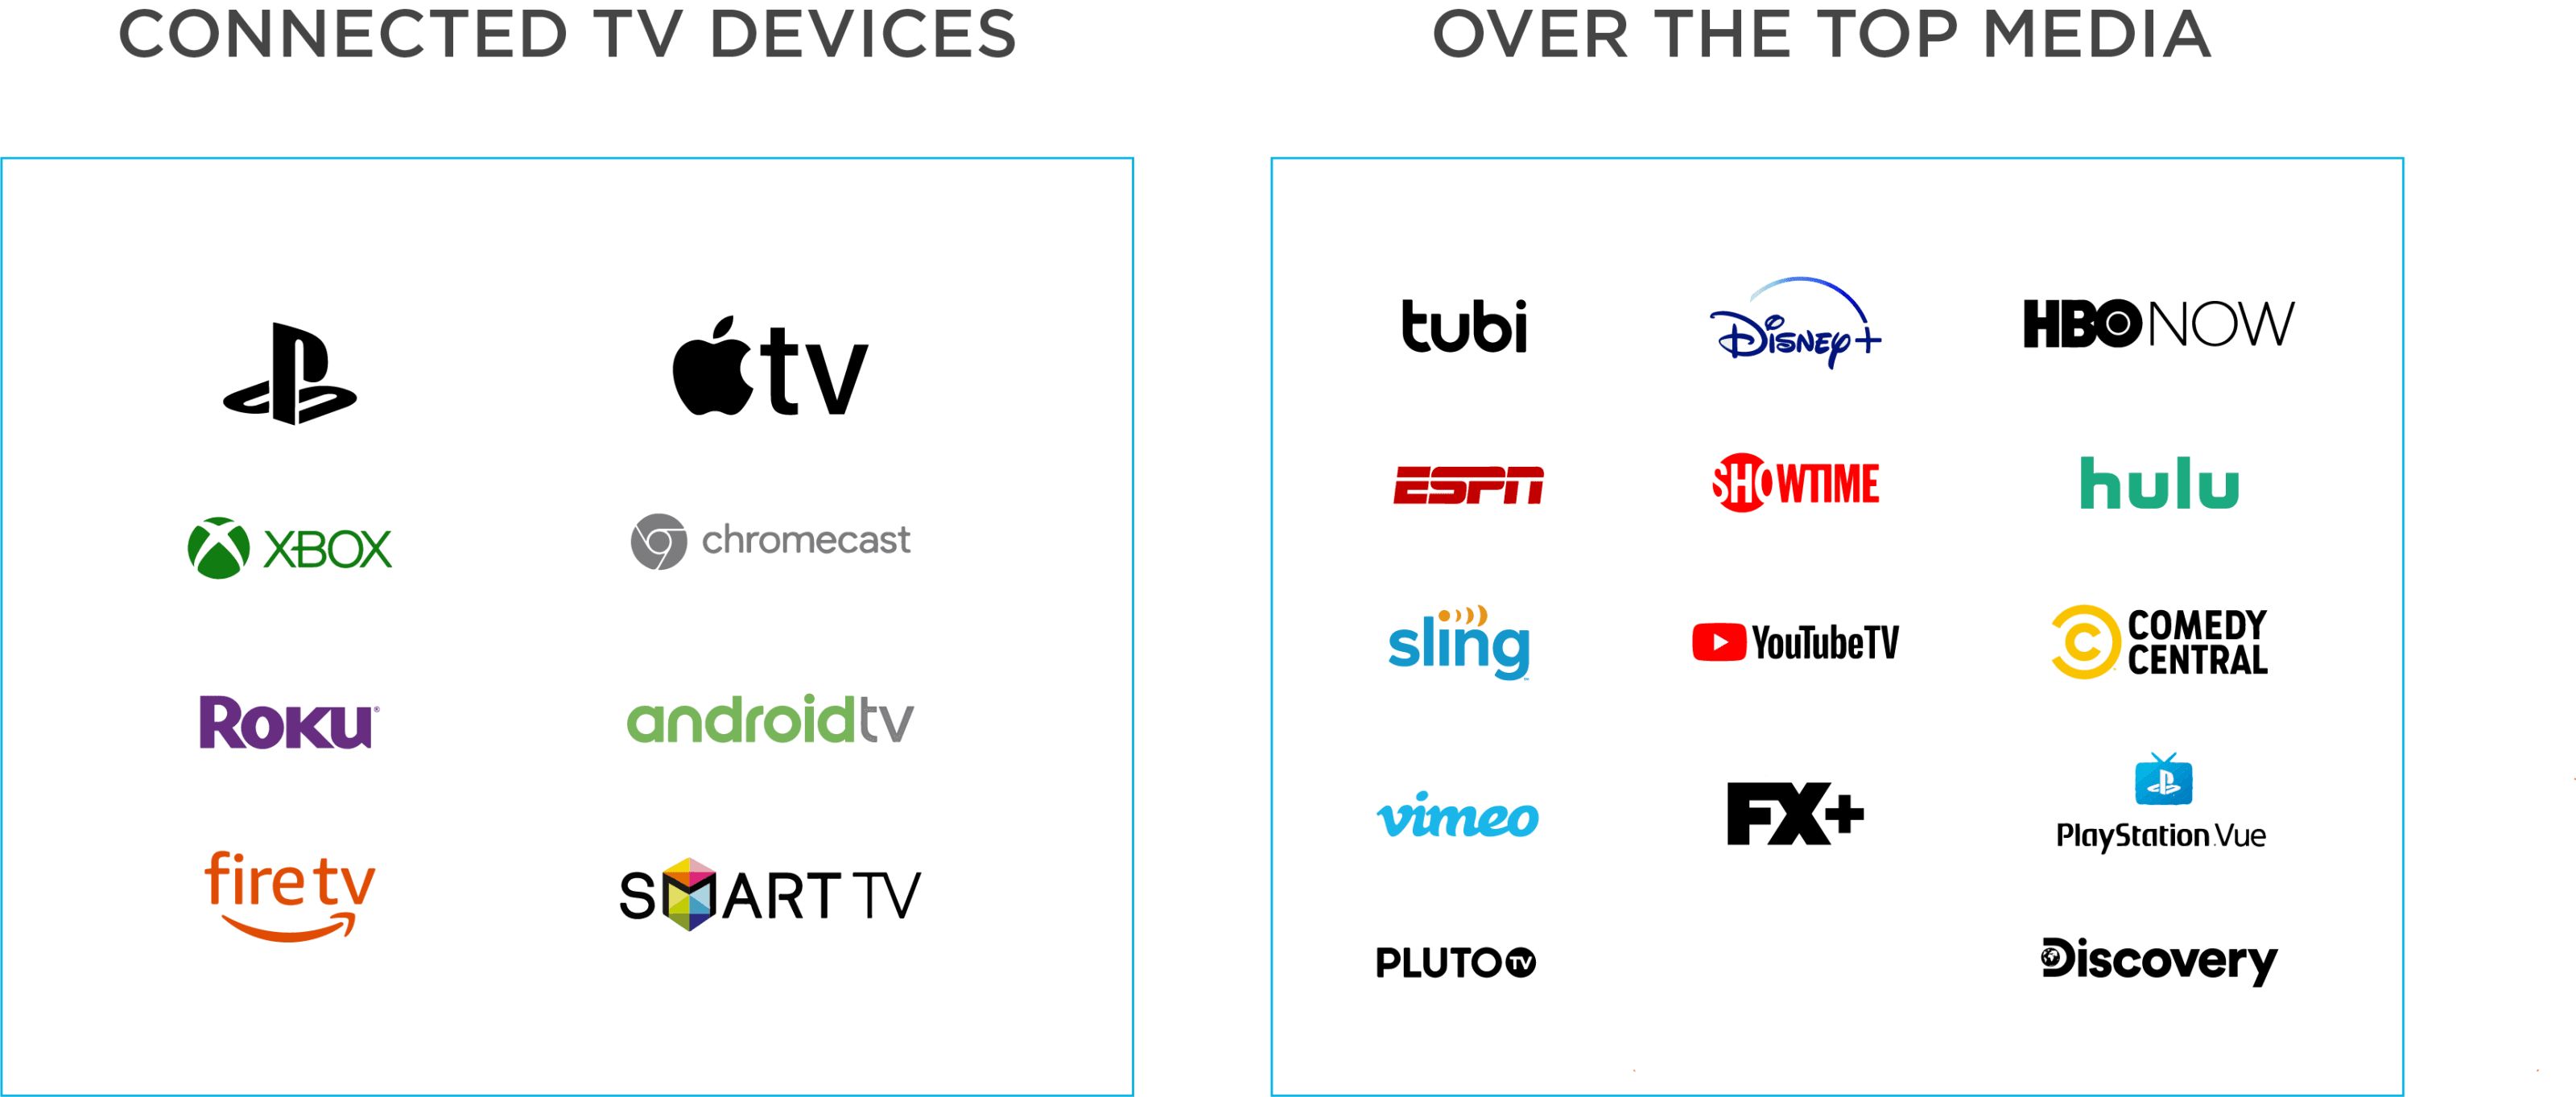 CTV devices and OTT platforms